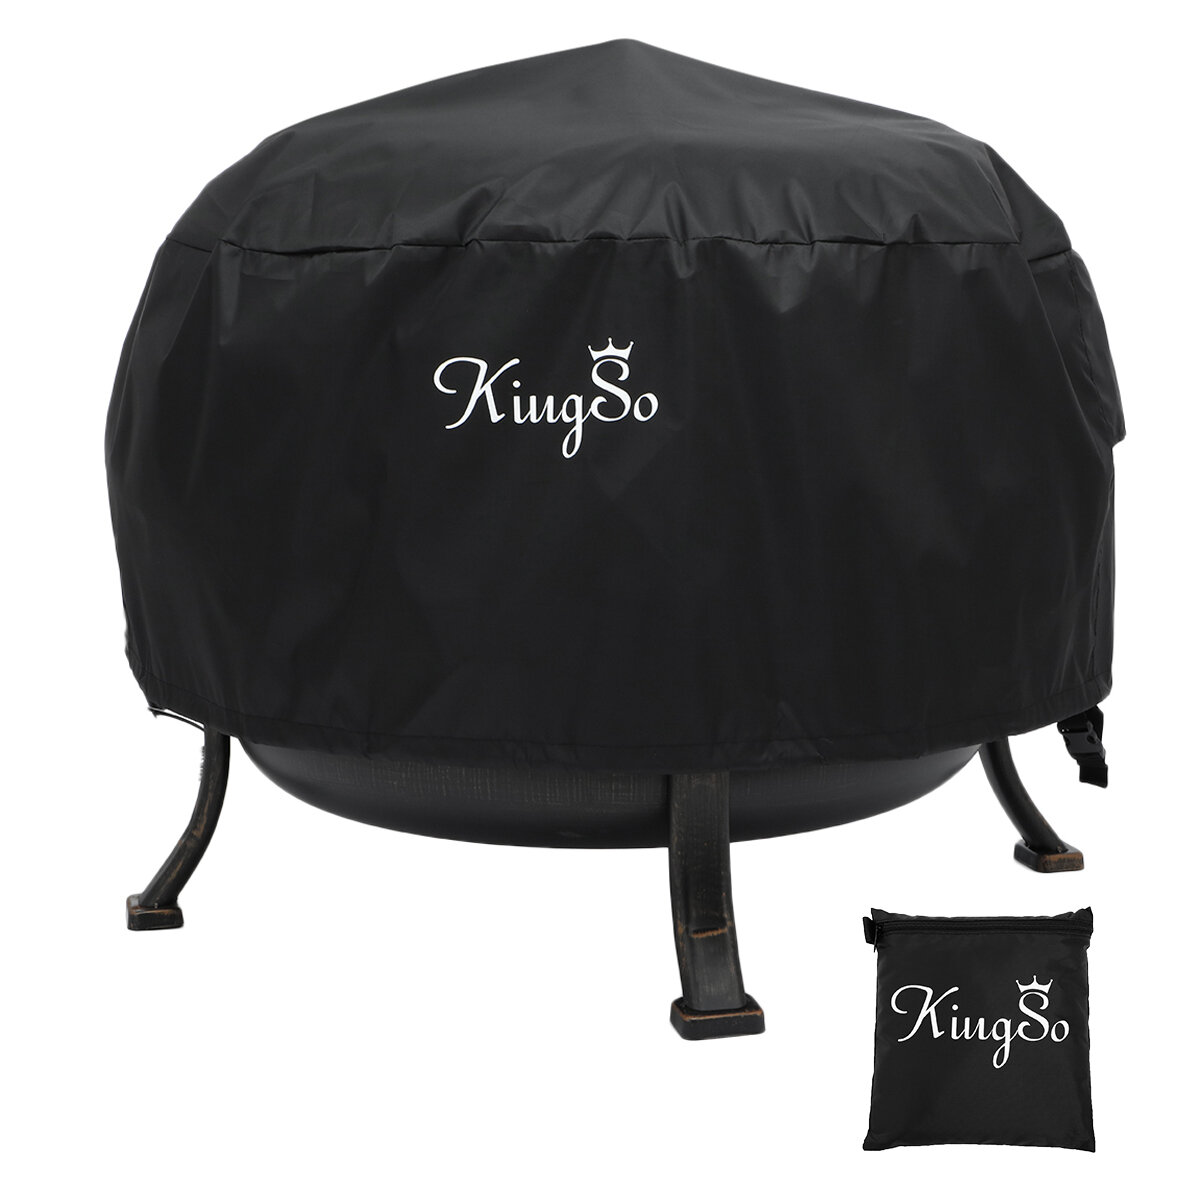 Kingso 36 Inch Round Fire Pit Cover, 36 Inch Round Fire Pit Cover